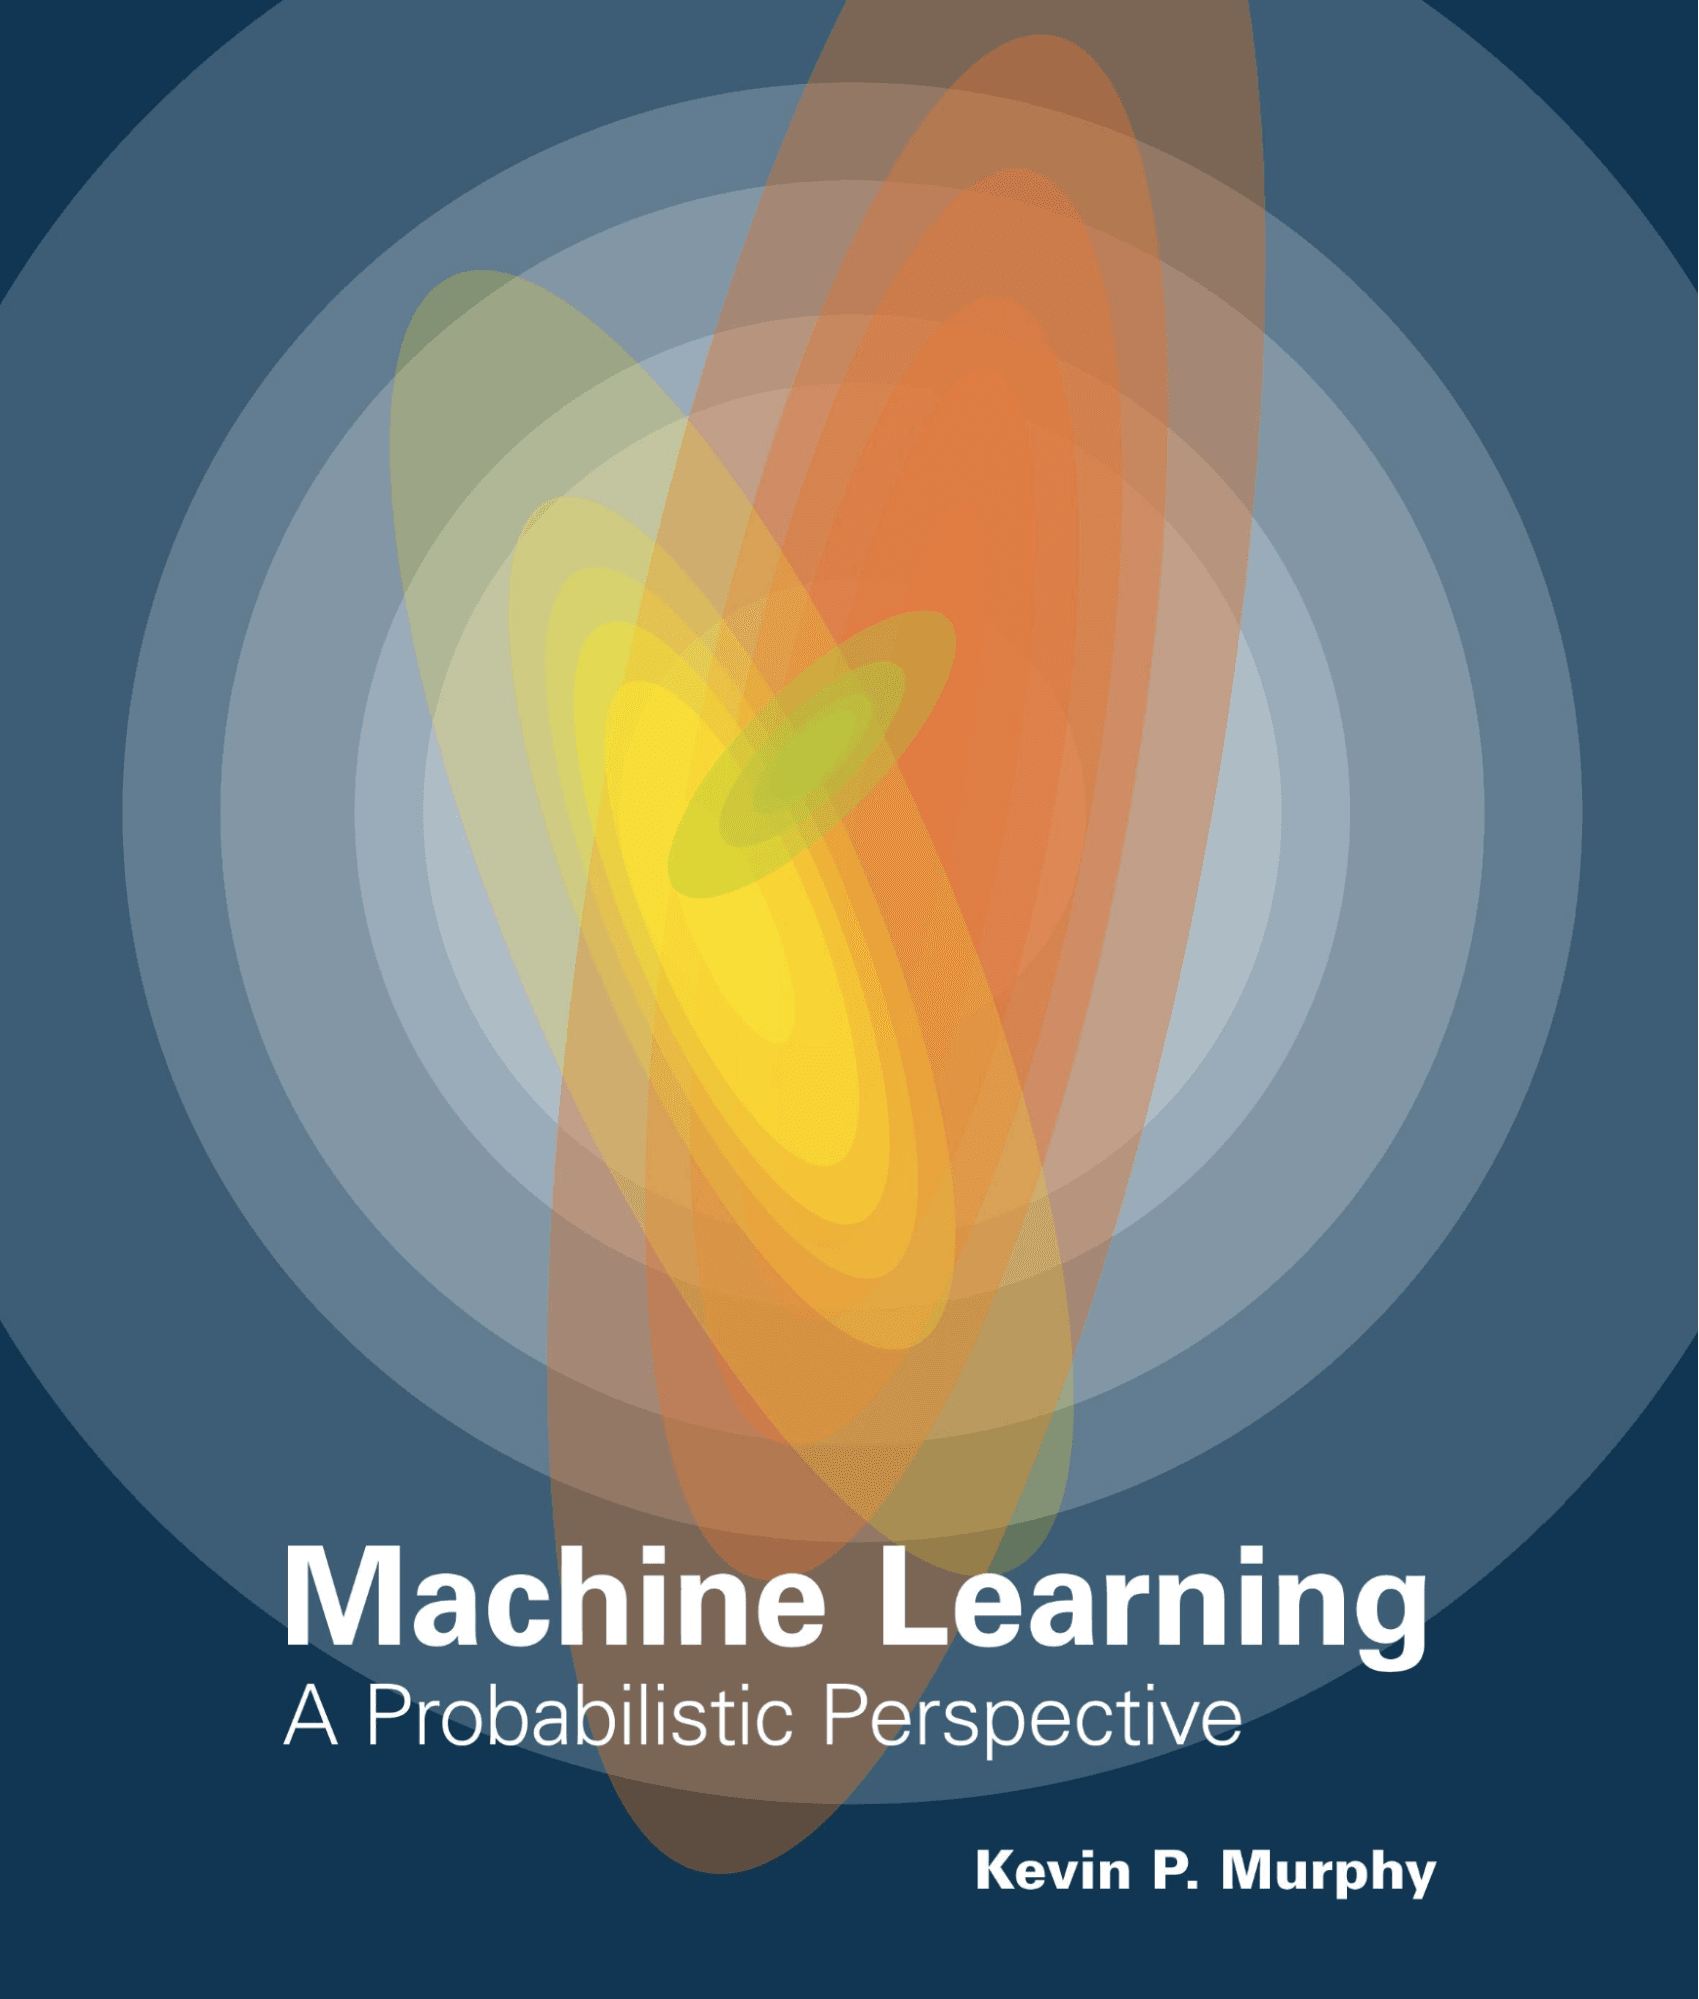 Machine Learning: A Probabilistic Perspective by Kevin P. Murphy